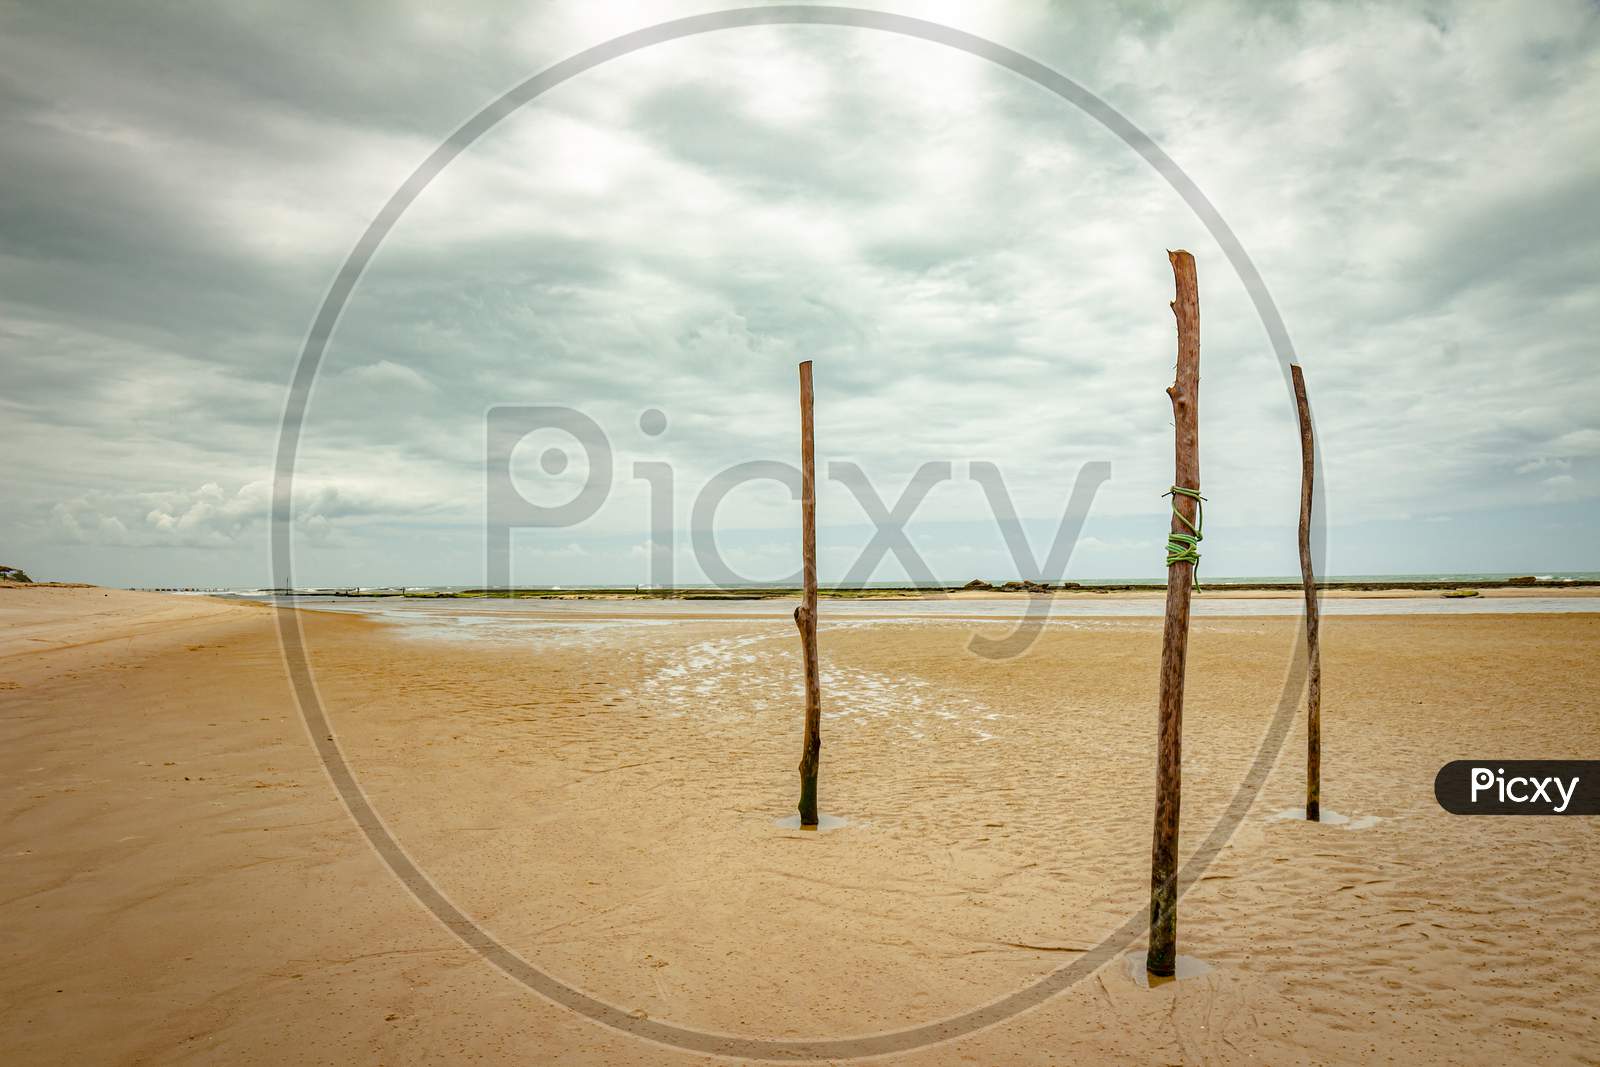 Three Wooden Poles On The Beach. Fine Art Photography. Desolate And Quiet Landscape.